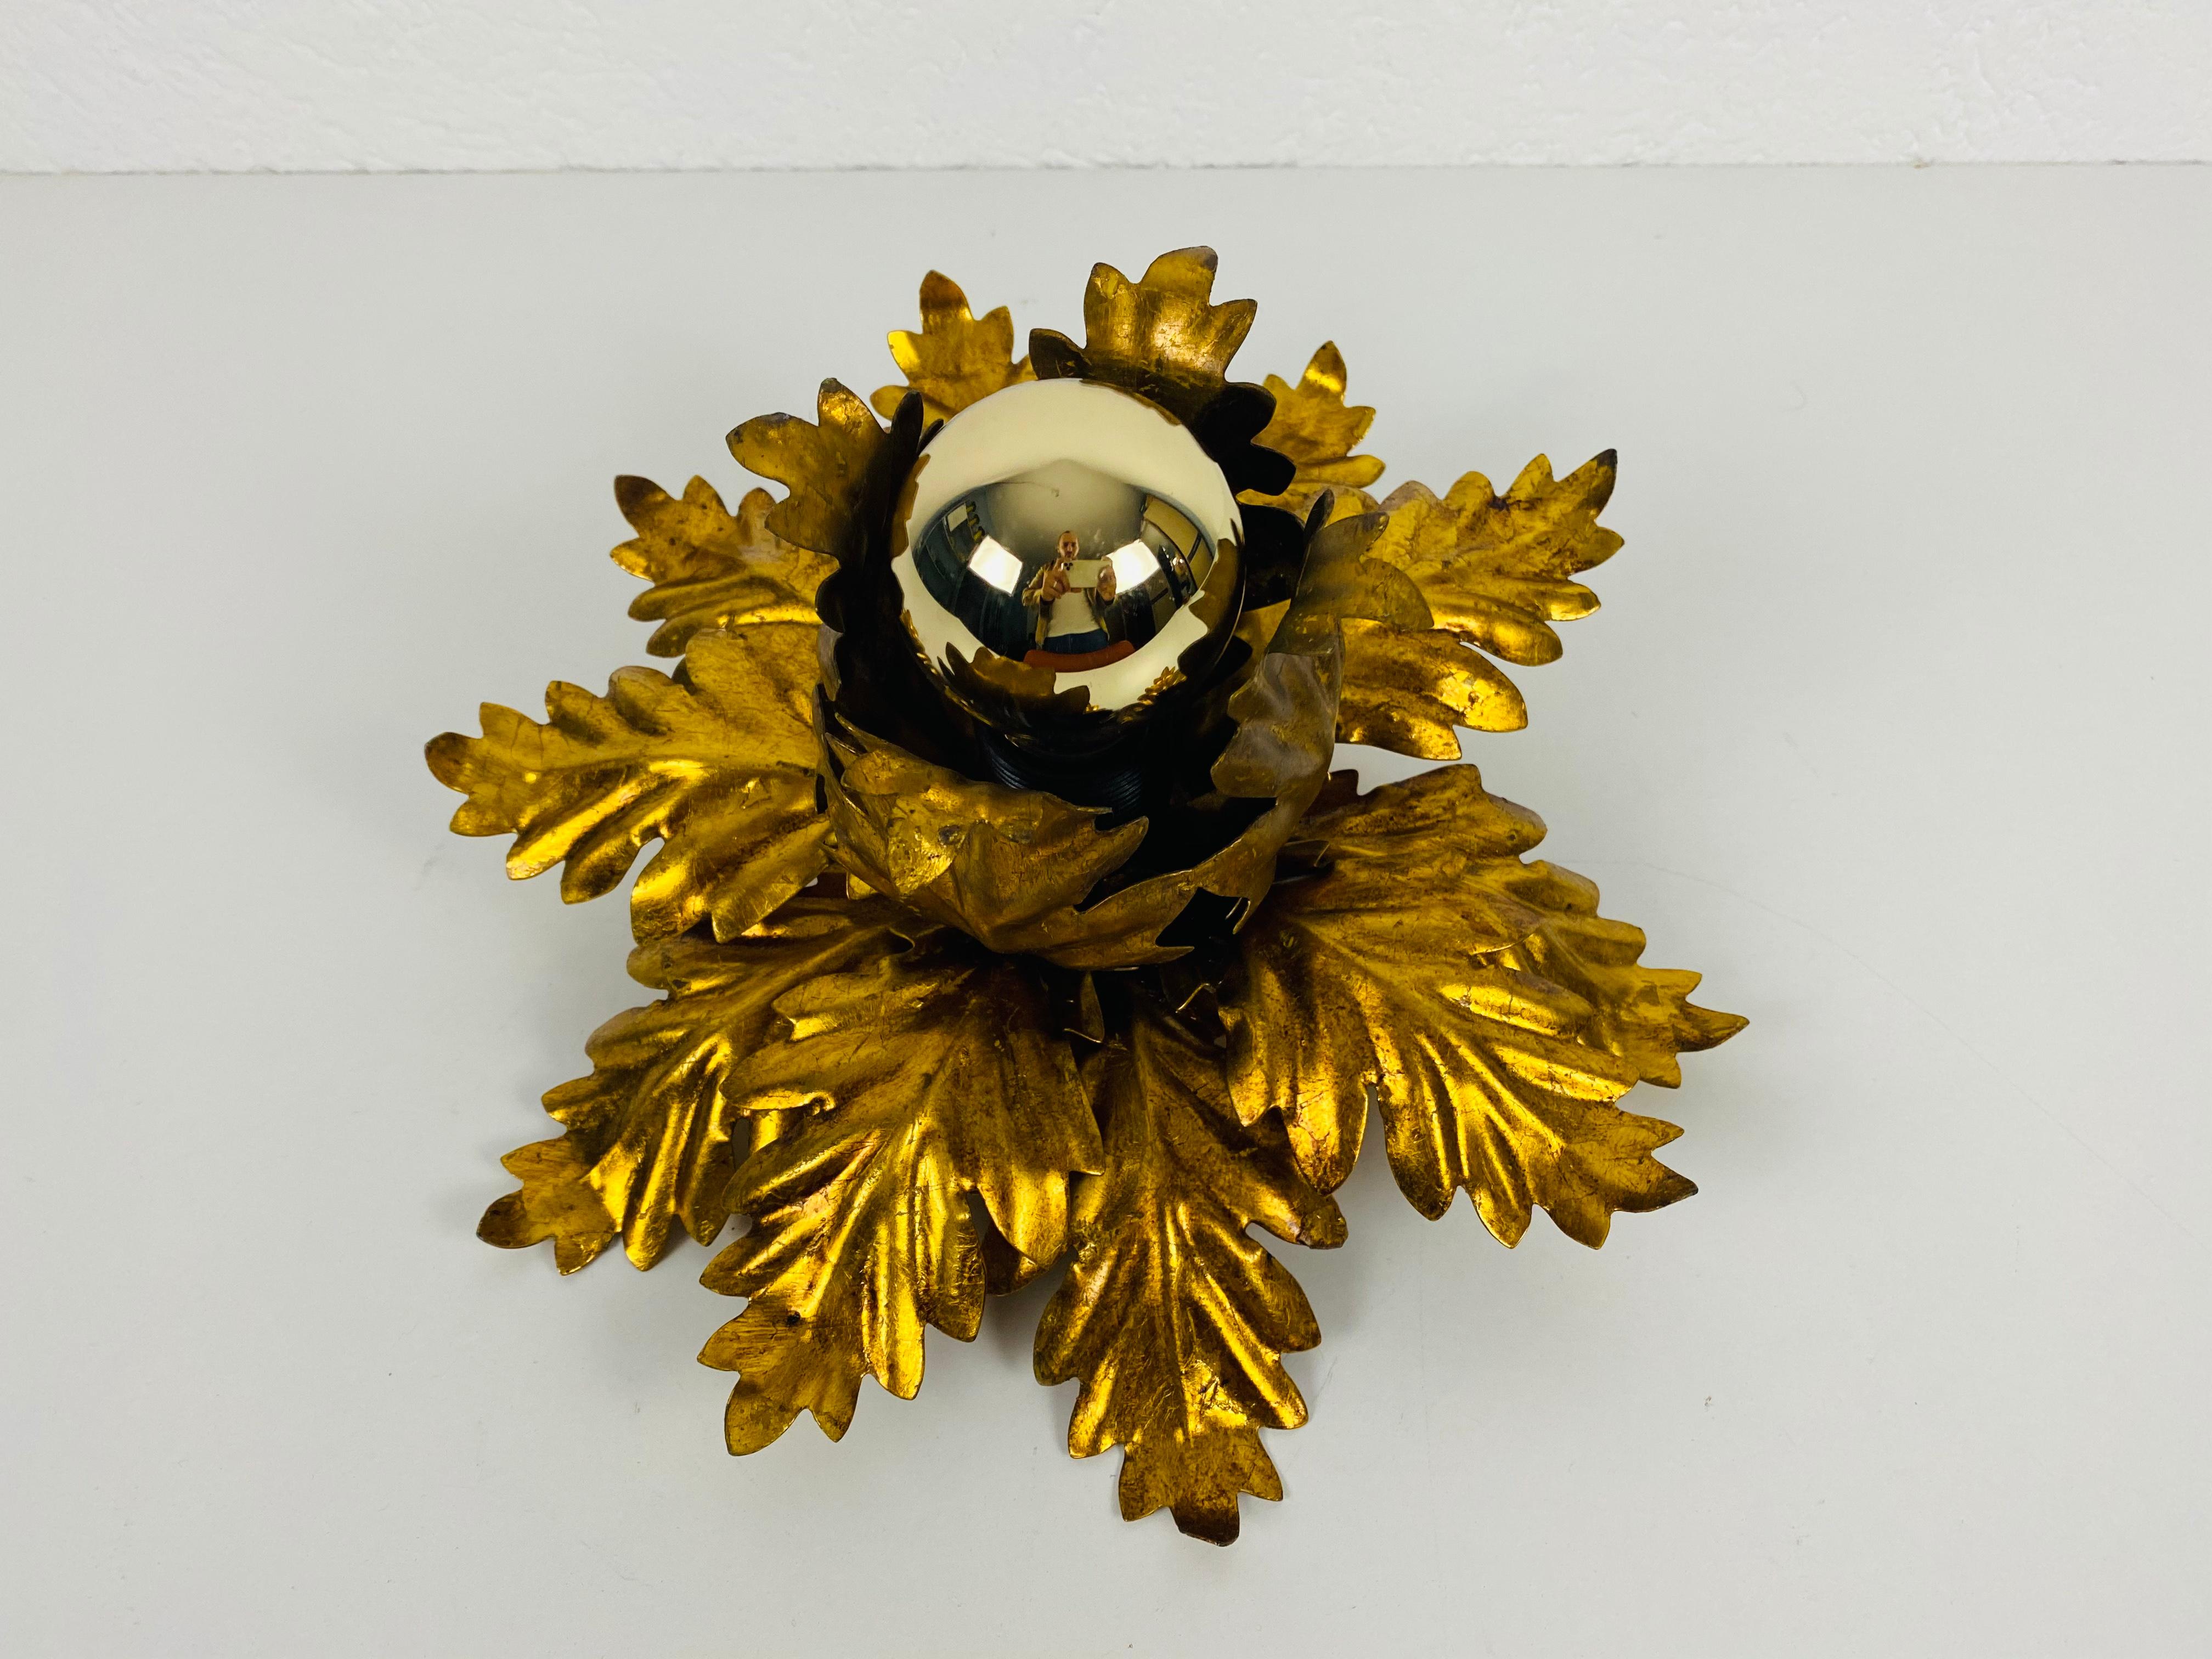 Hand-Crafted Golden Florentine Flower Shape Flushmount by Banci, Italy, 1970s For Sale